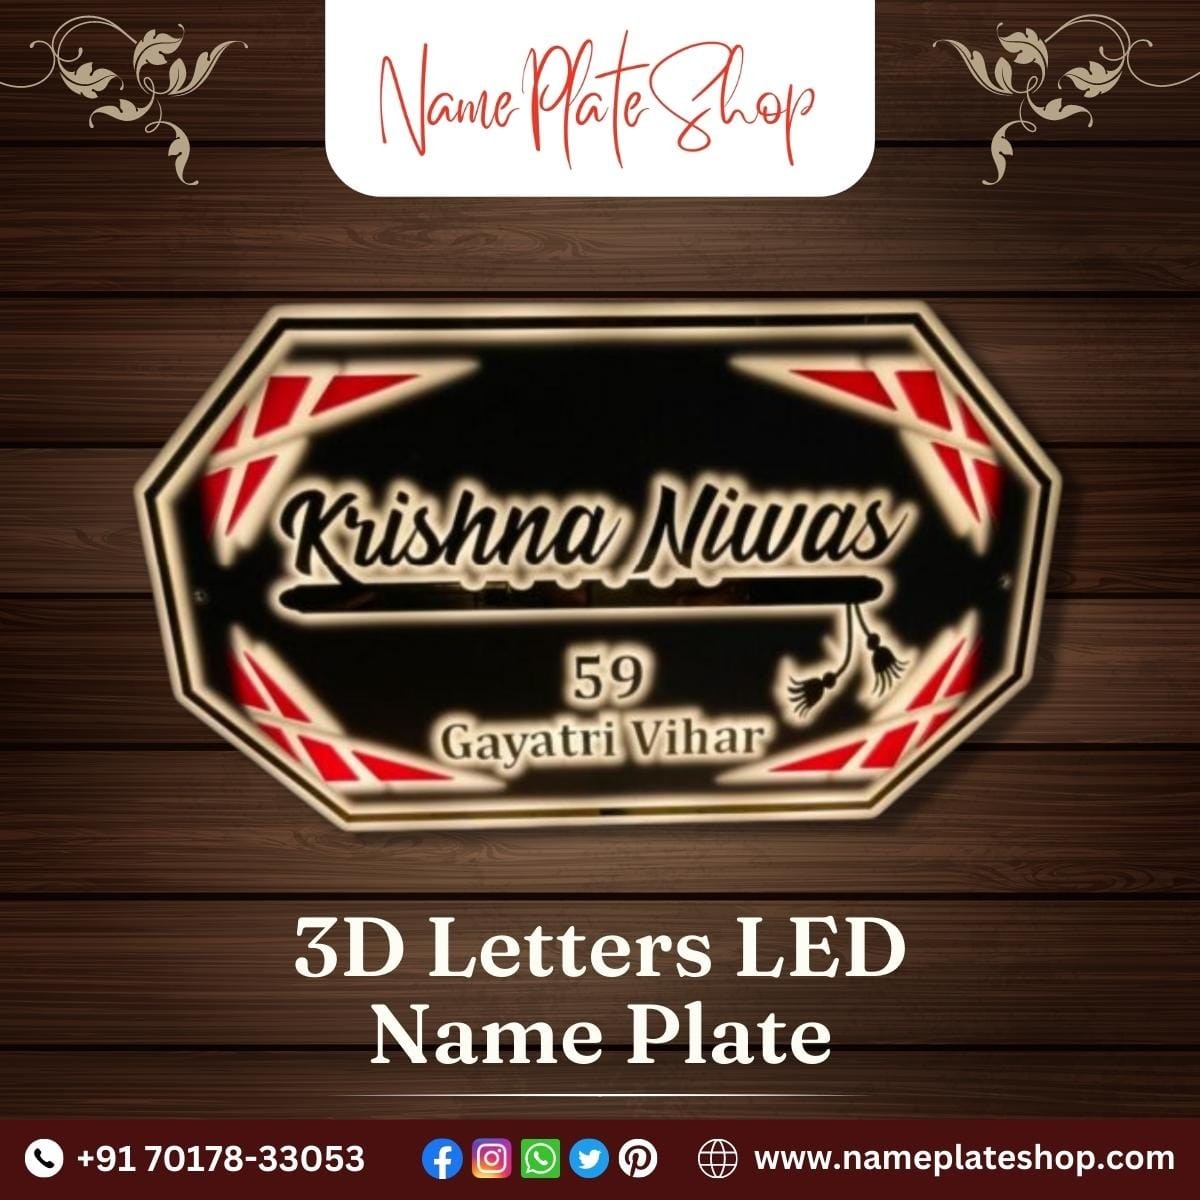 Best Personalized 3D Letters LED Nameplates Online